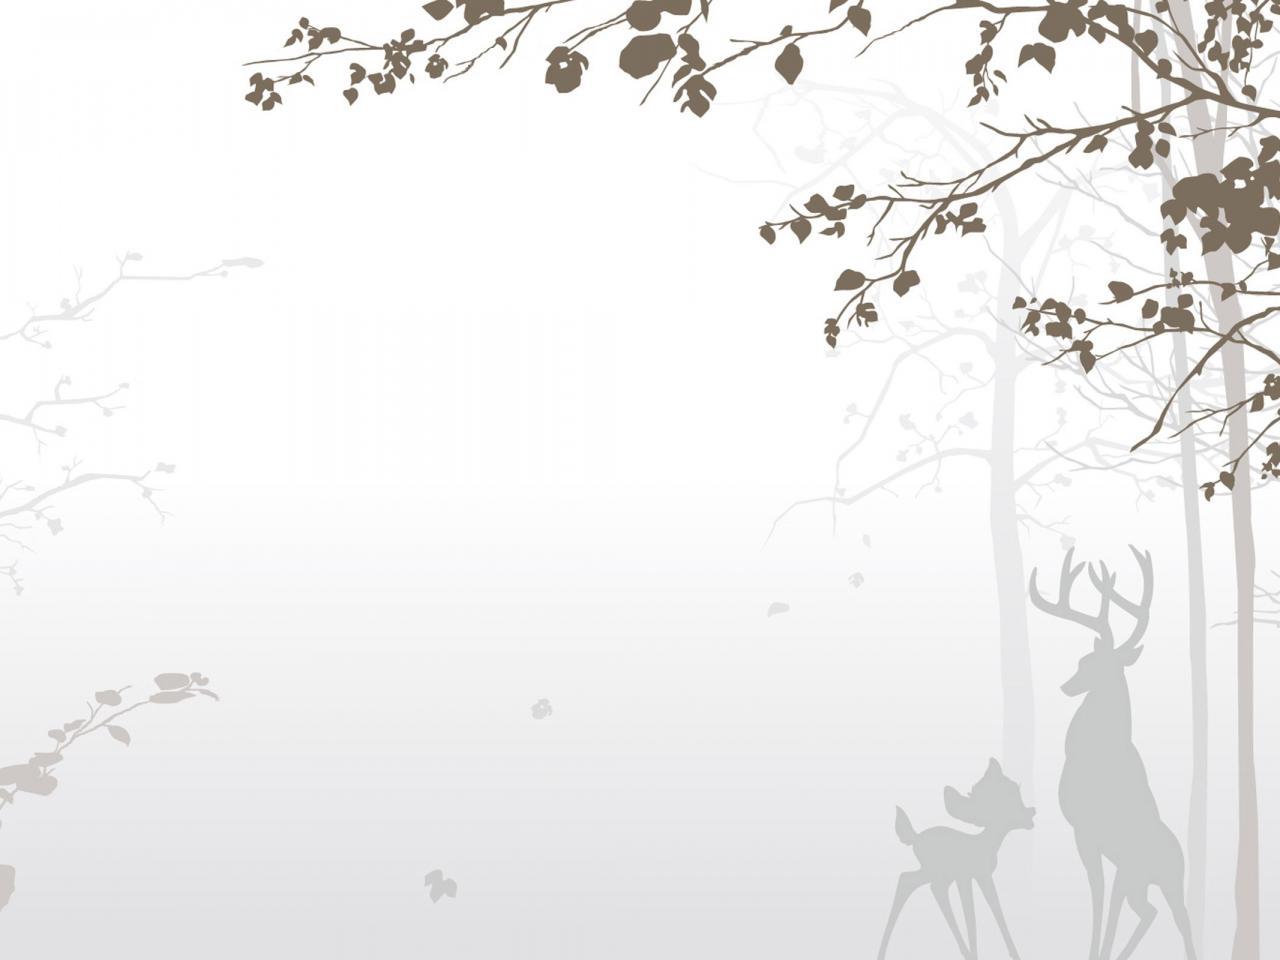 Bambi Silhouette Disney Wallpaper Background 1280x960 For 17 Inch